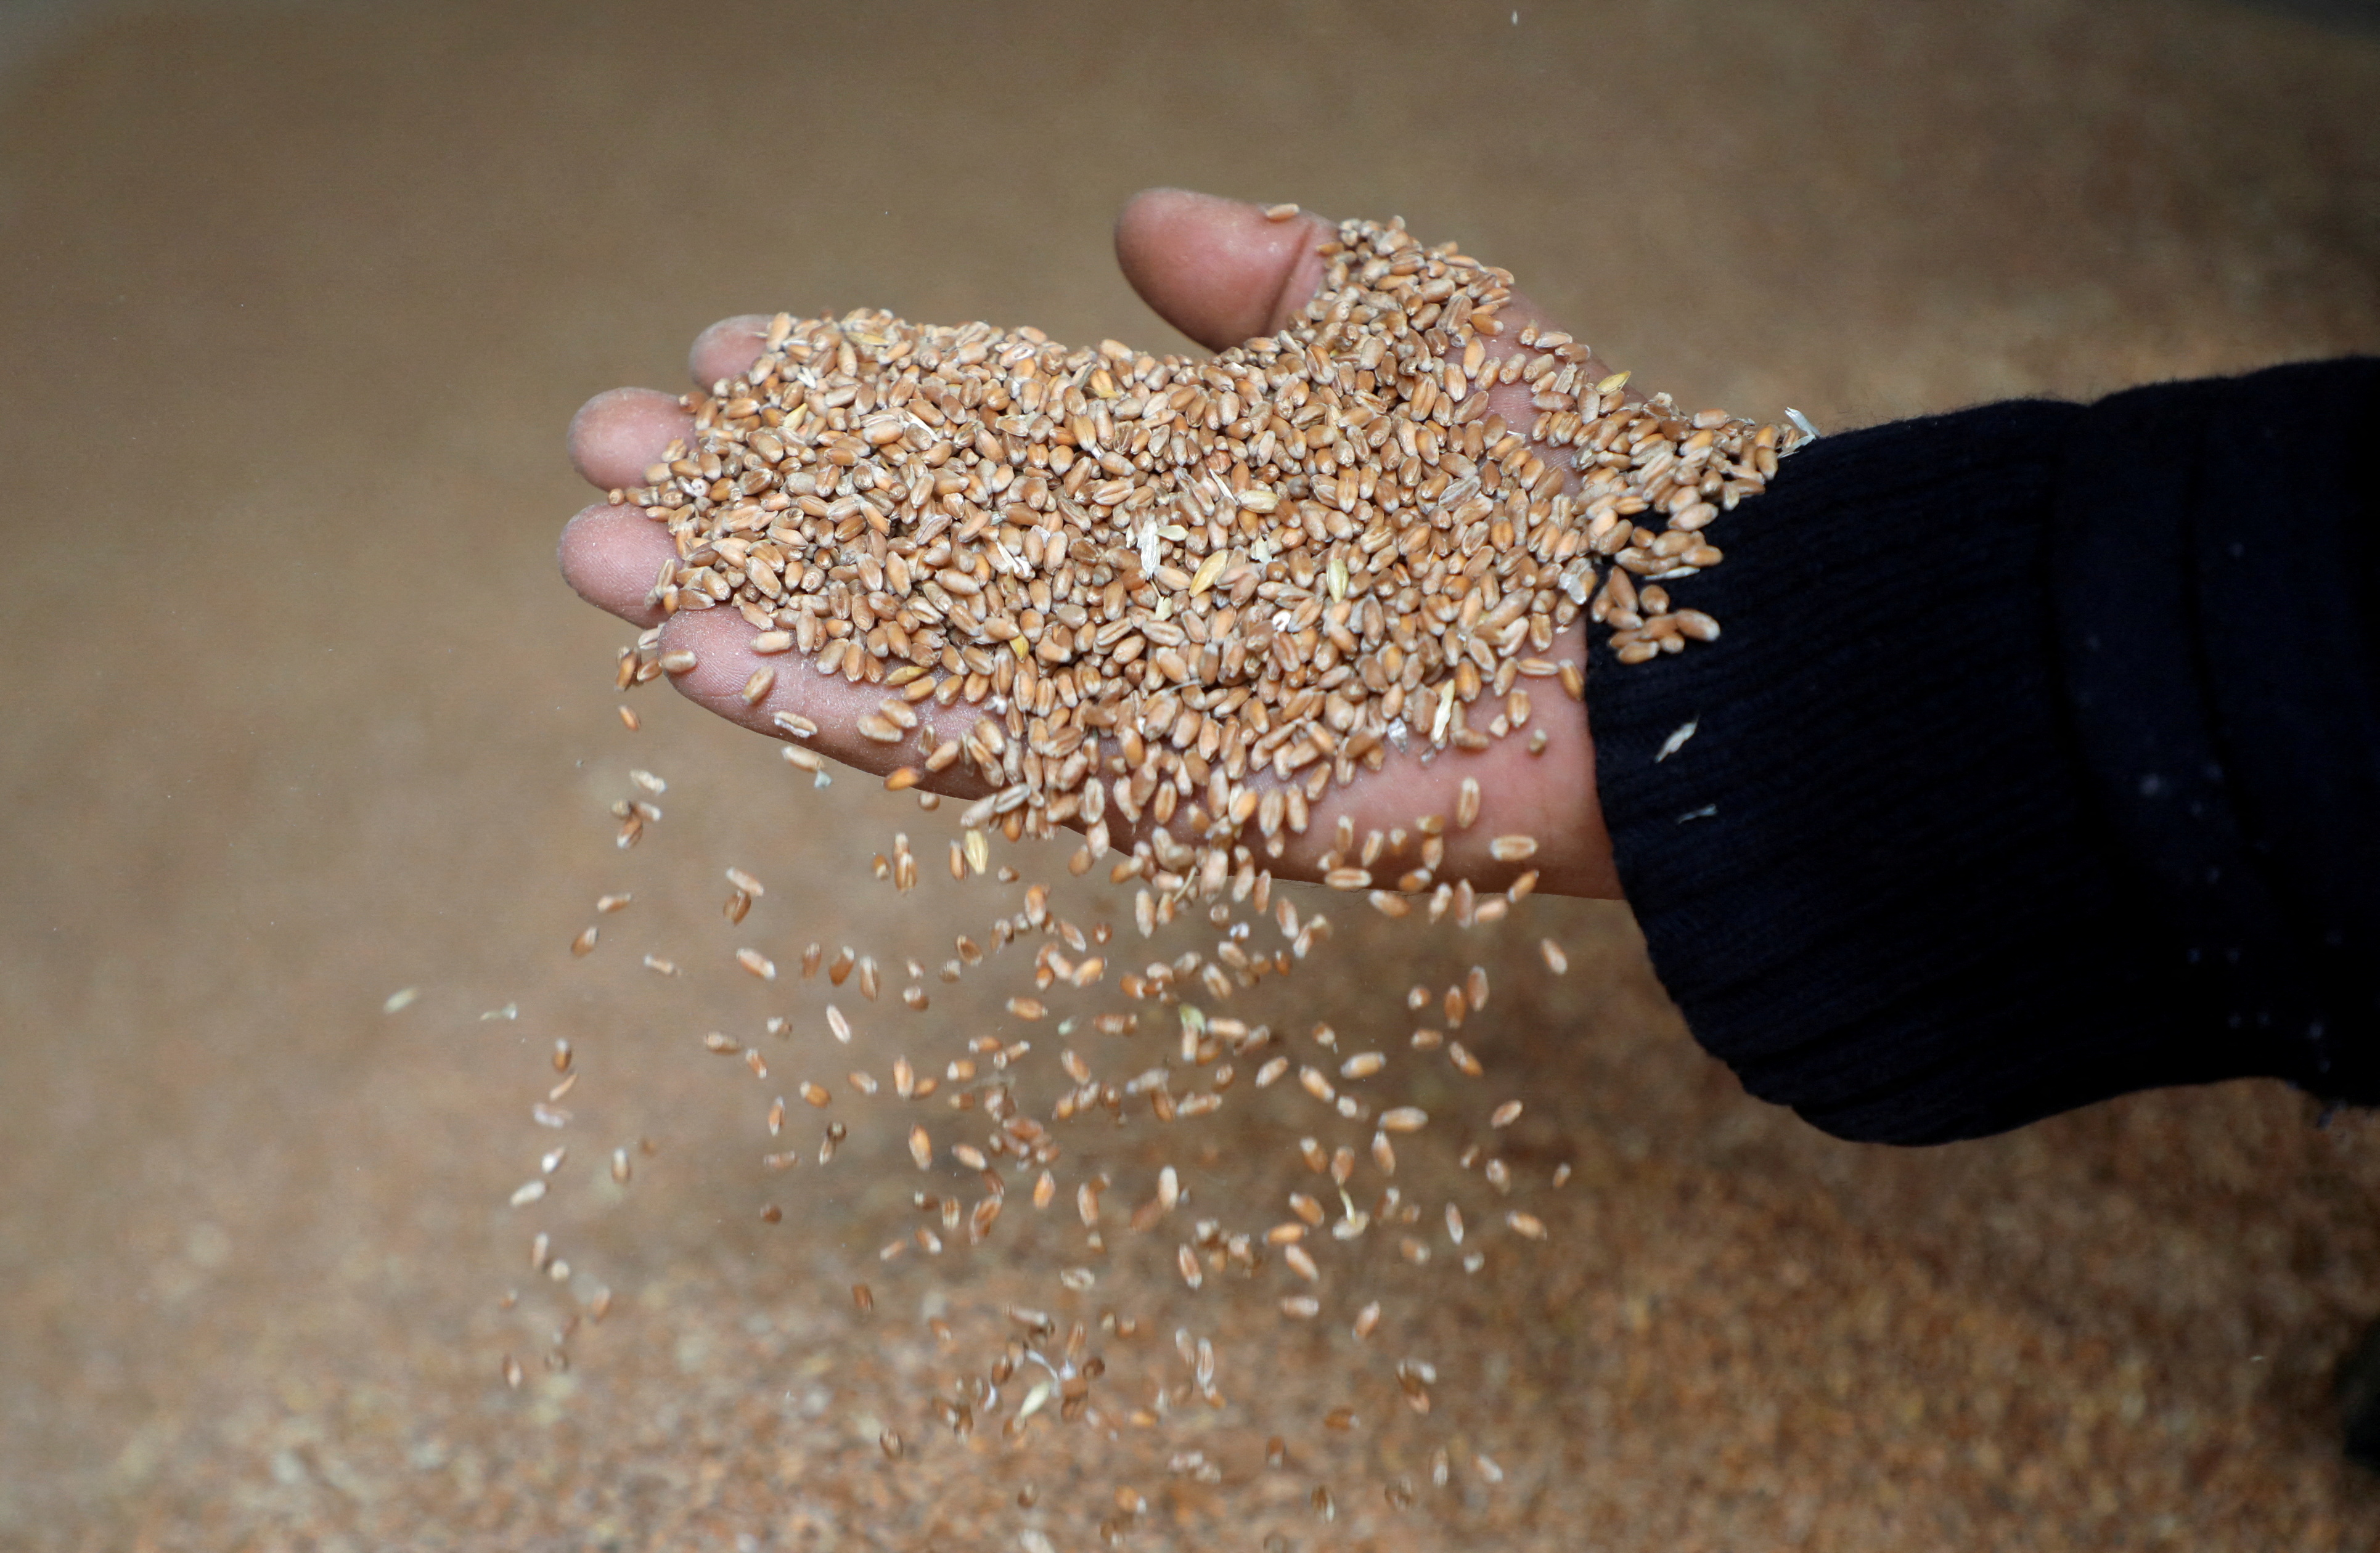 A worker displays grains of wheat at a mill in Beirut